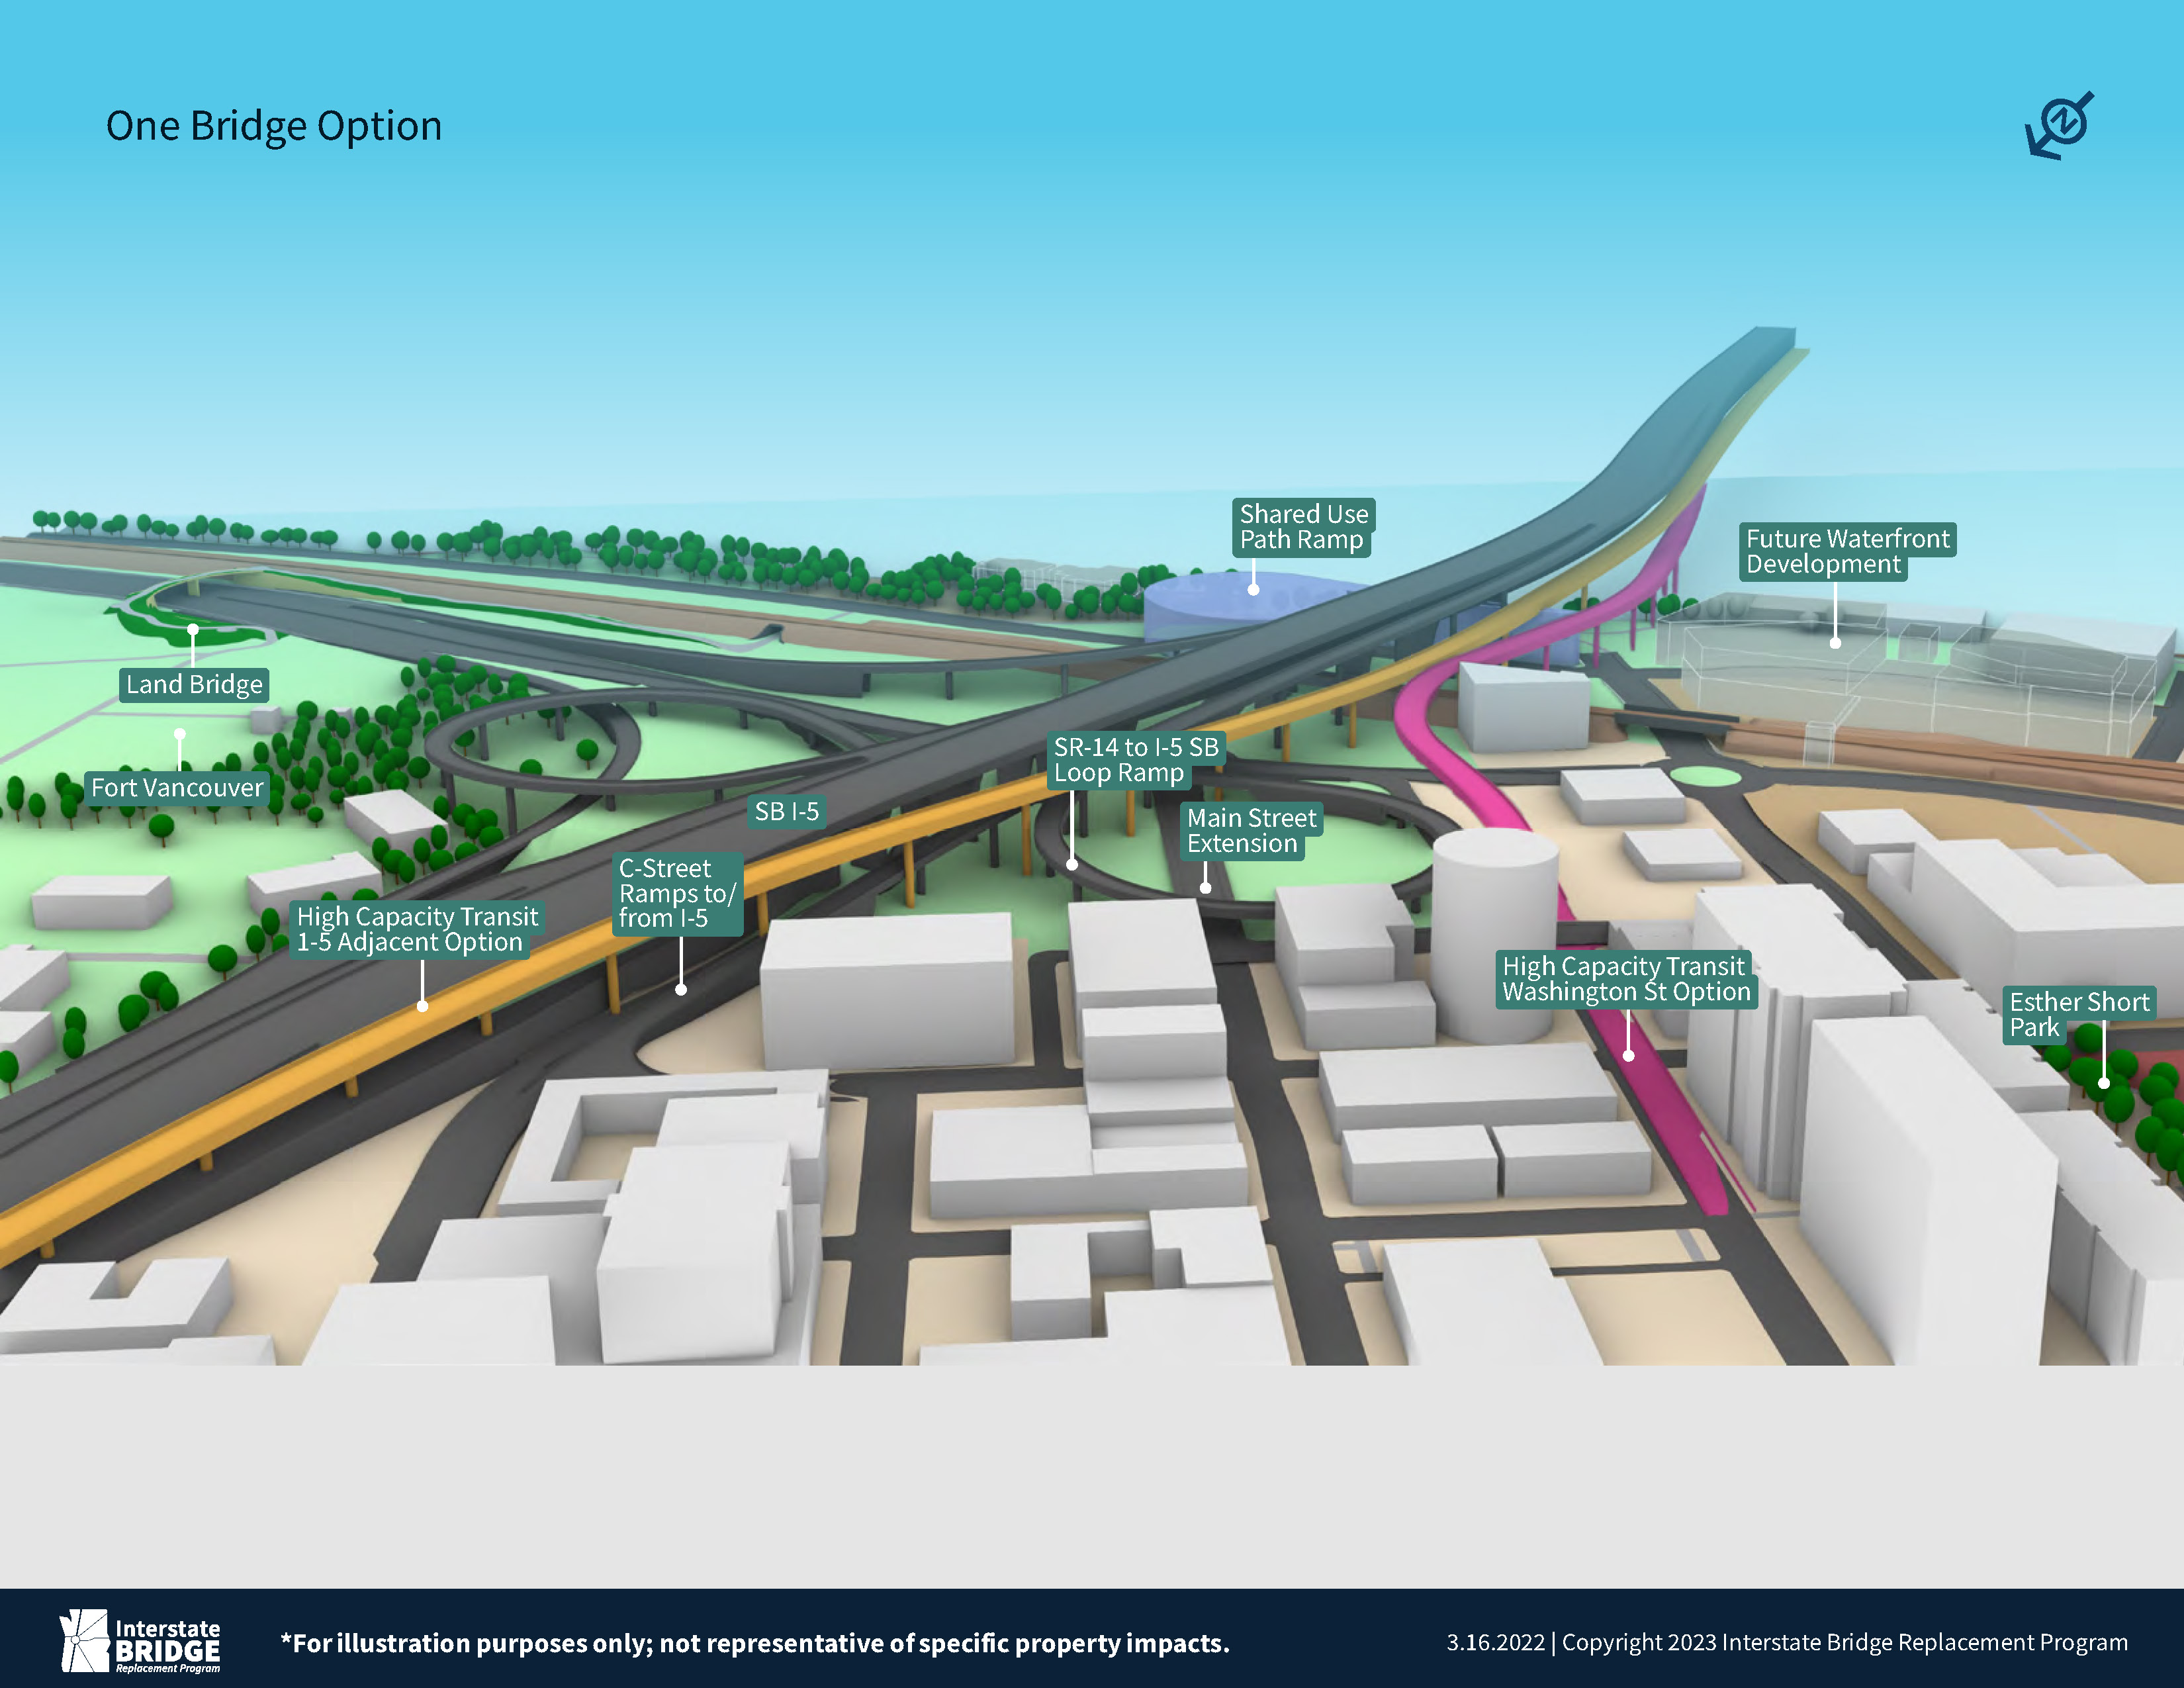 <p>Downtown Vancouver One Bridge Option shows High Capacity Transit hugging 1-5 and a Washington St option.</p>